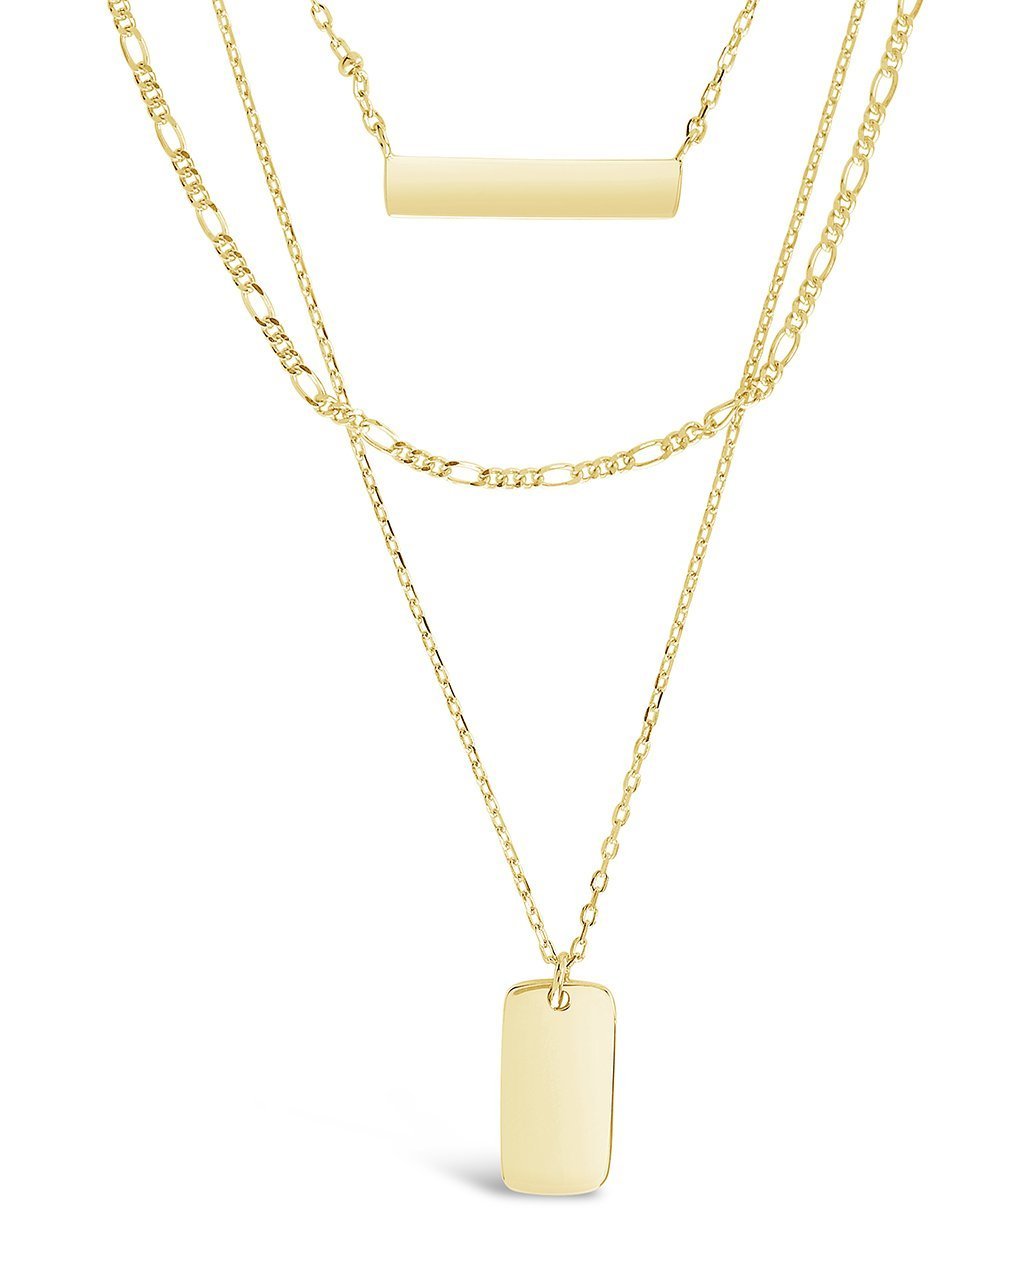 Triple Layered Bar Necklace - Sterling Forever